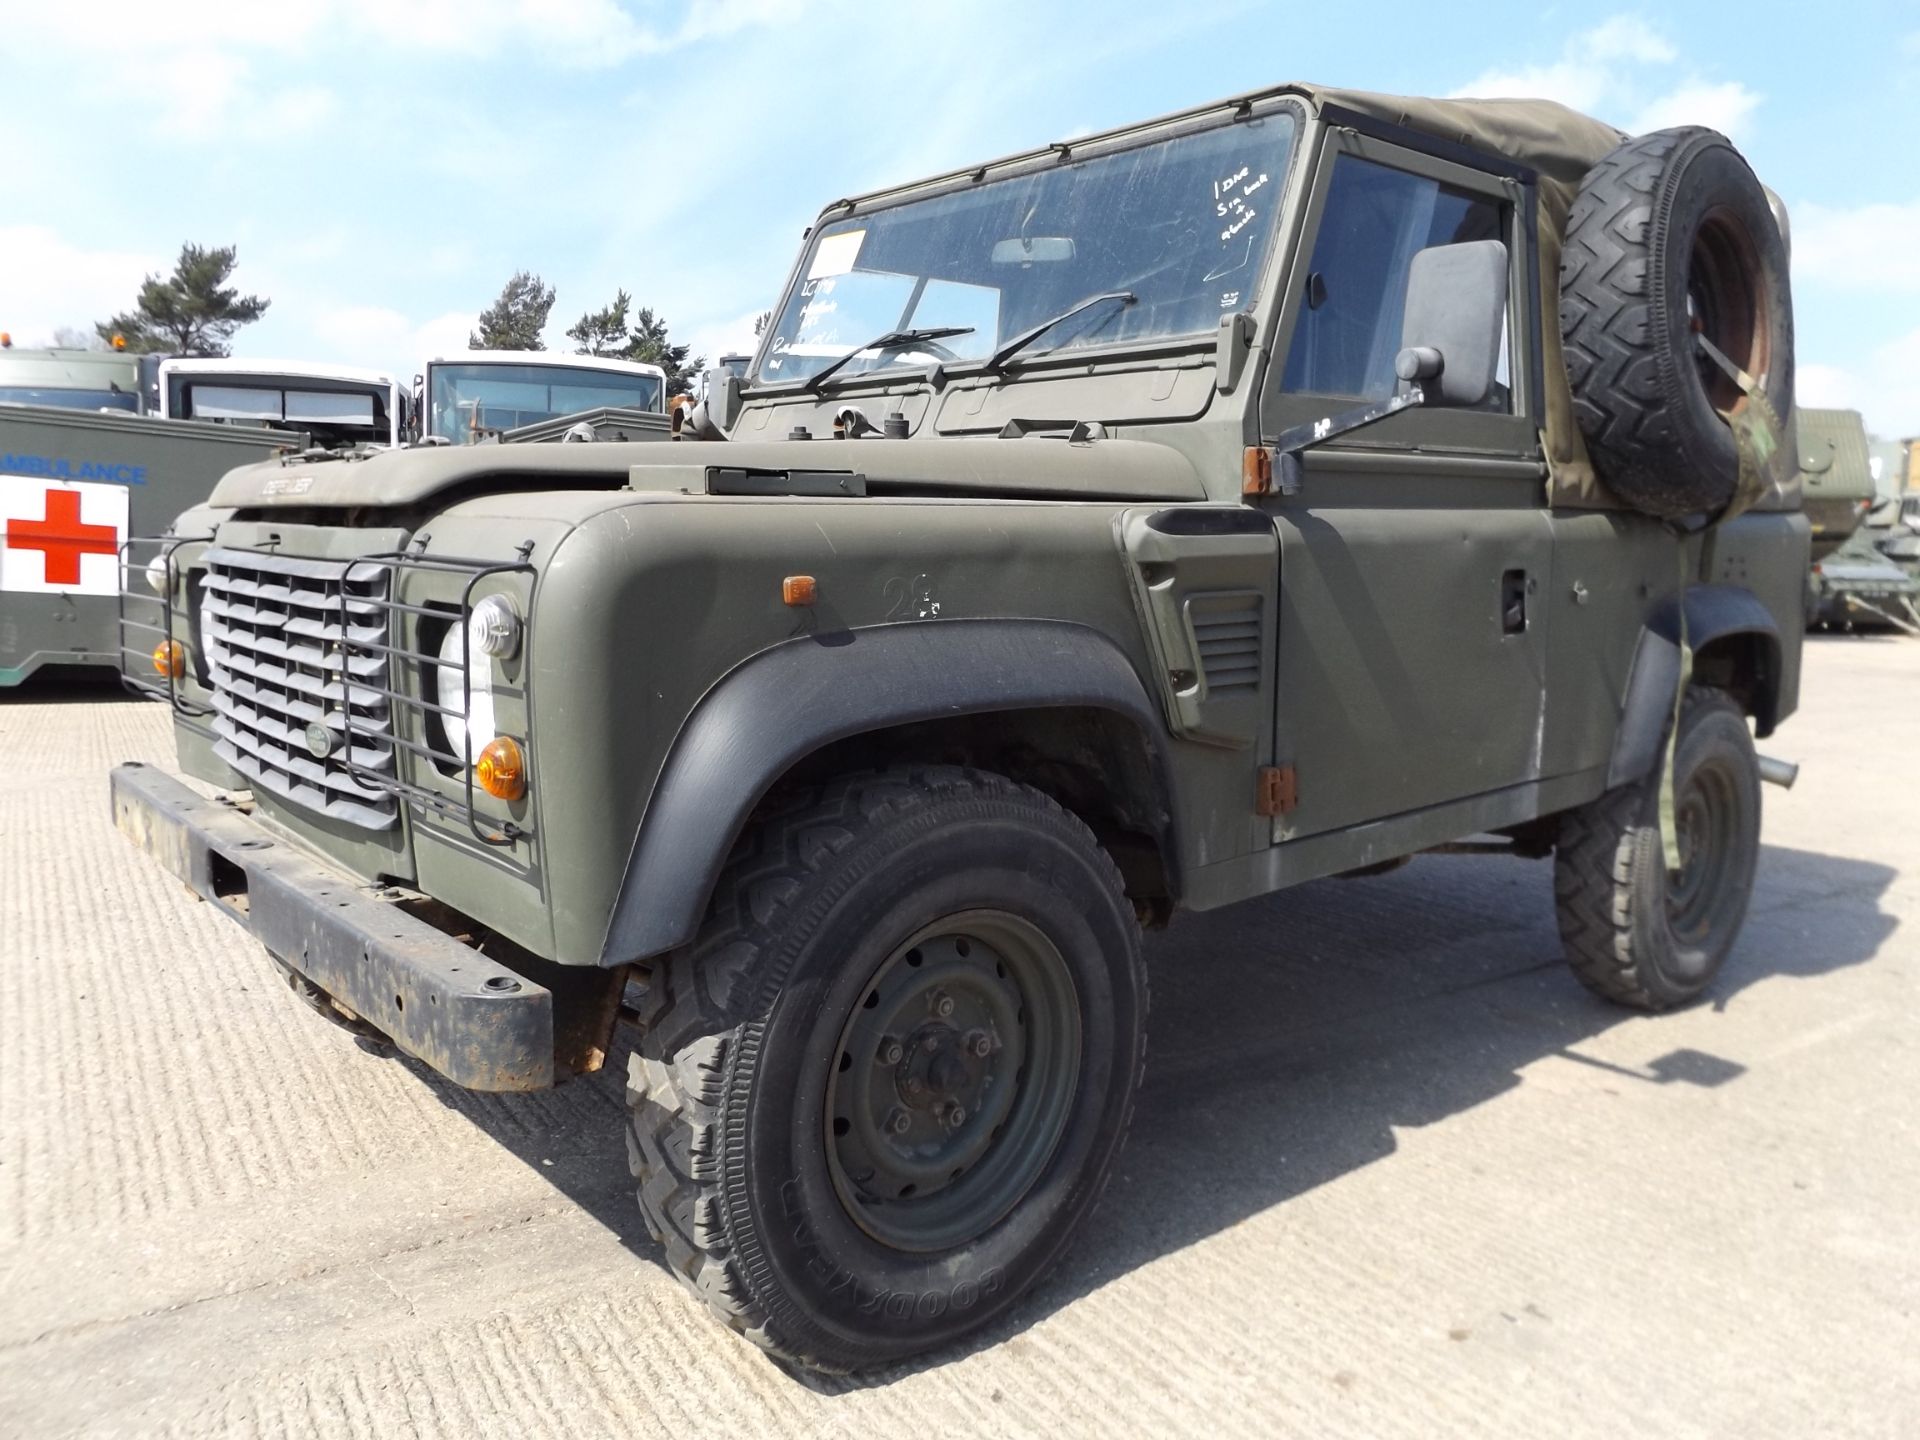 Land Rover Wolf 90 Soft Top - Image 5 of 20